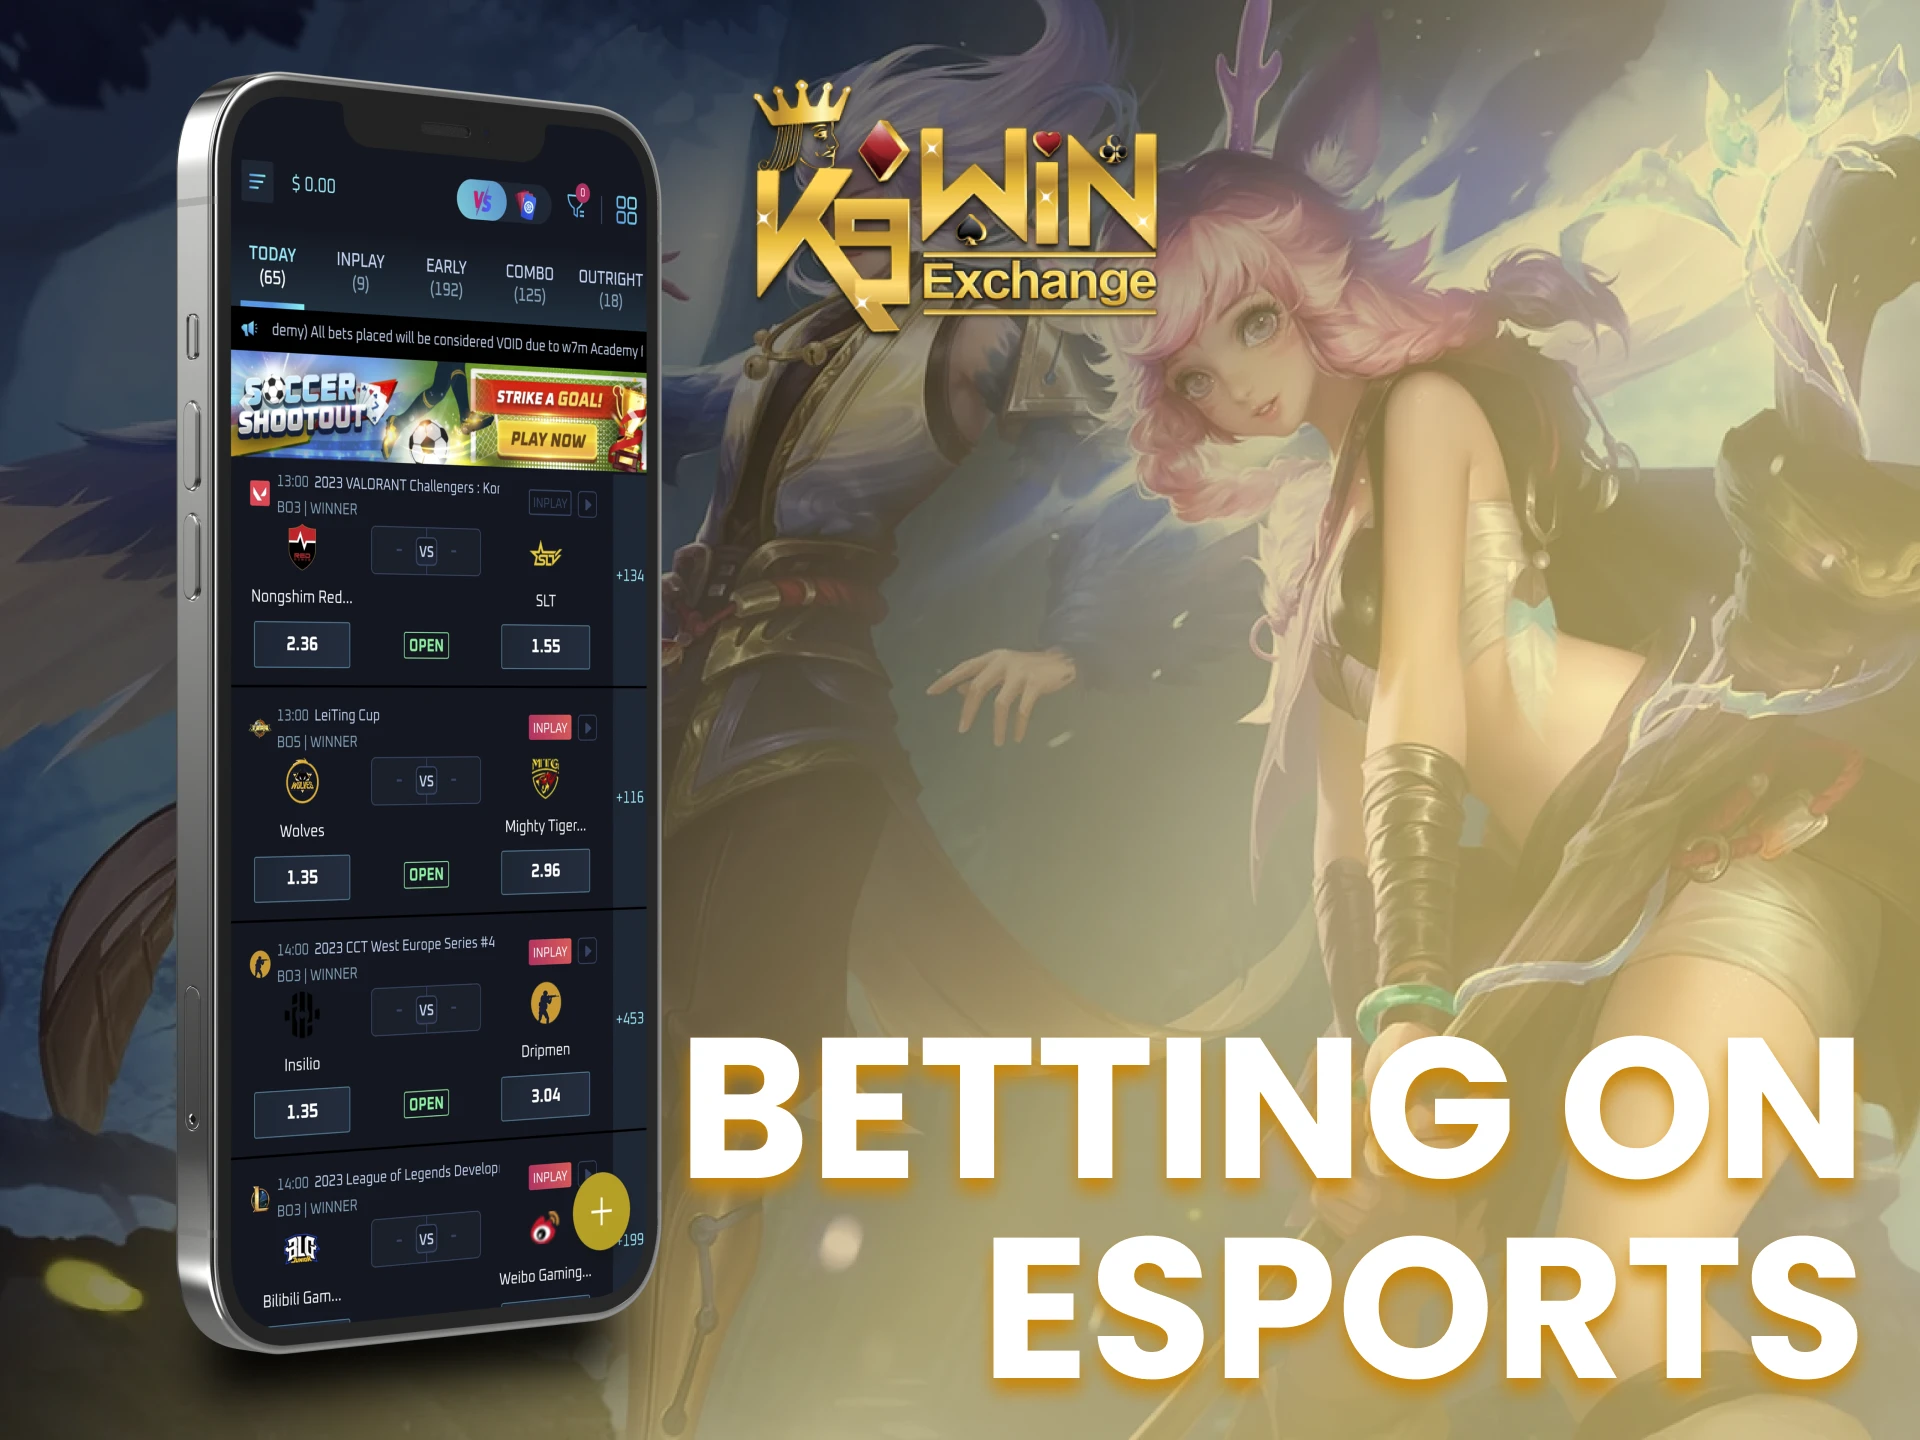 Bet on different esports using the K9Win app.